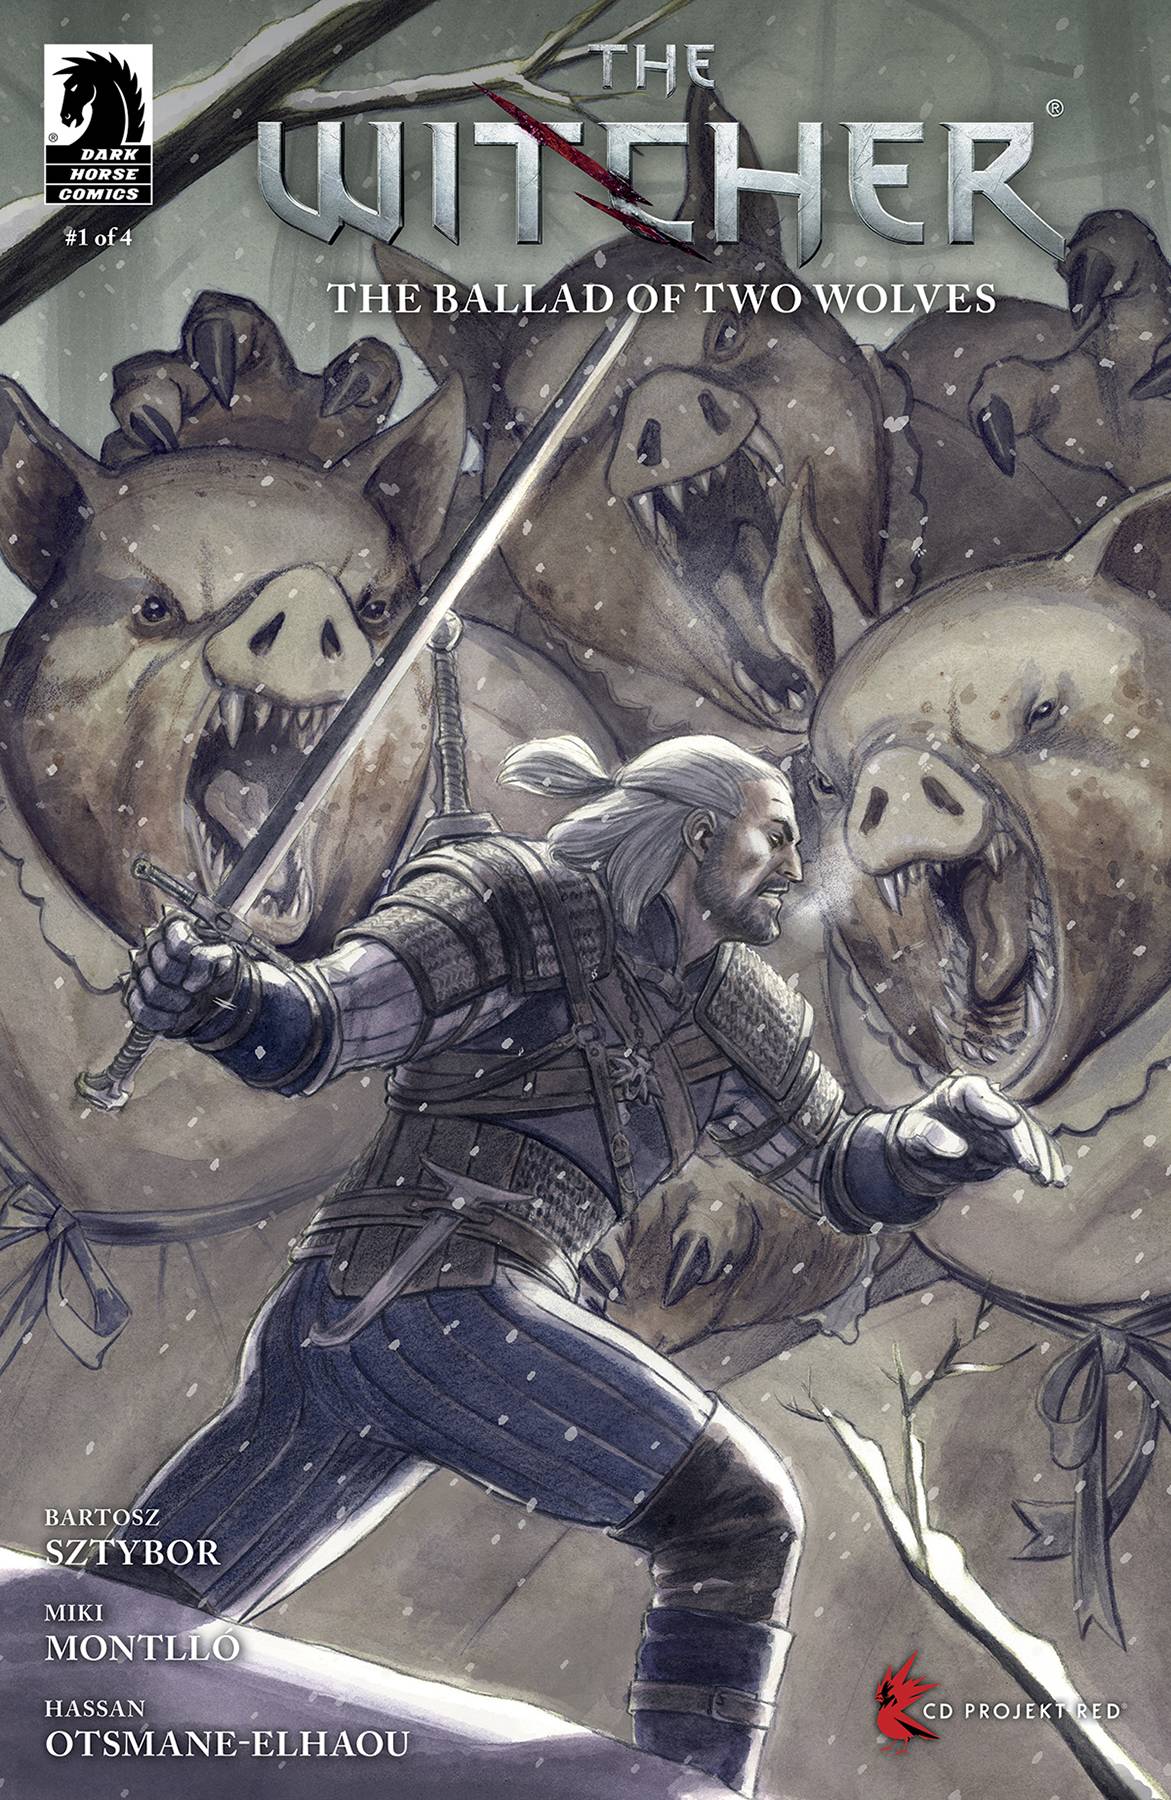 WITCHER THE BALLAD OF TWO WOLVES #1 (OF 4) CVR D LOPEZ - Third Eye